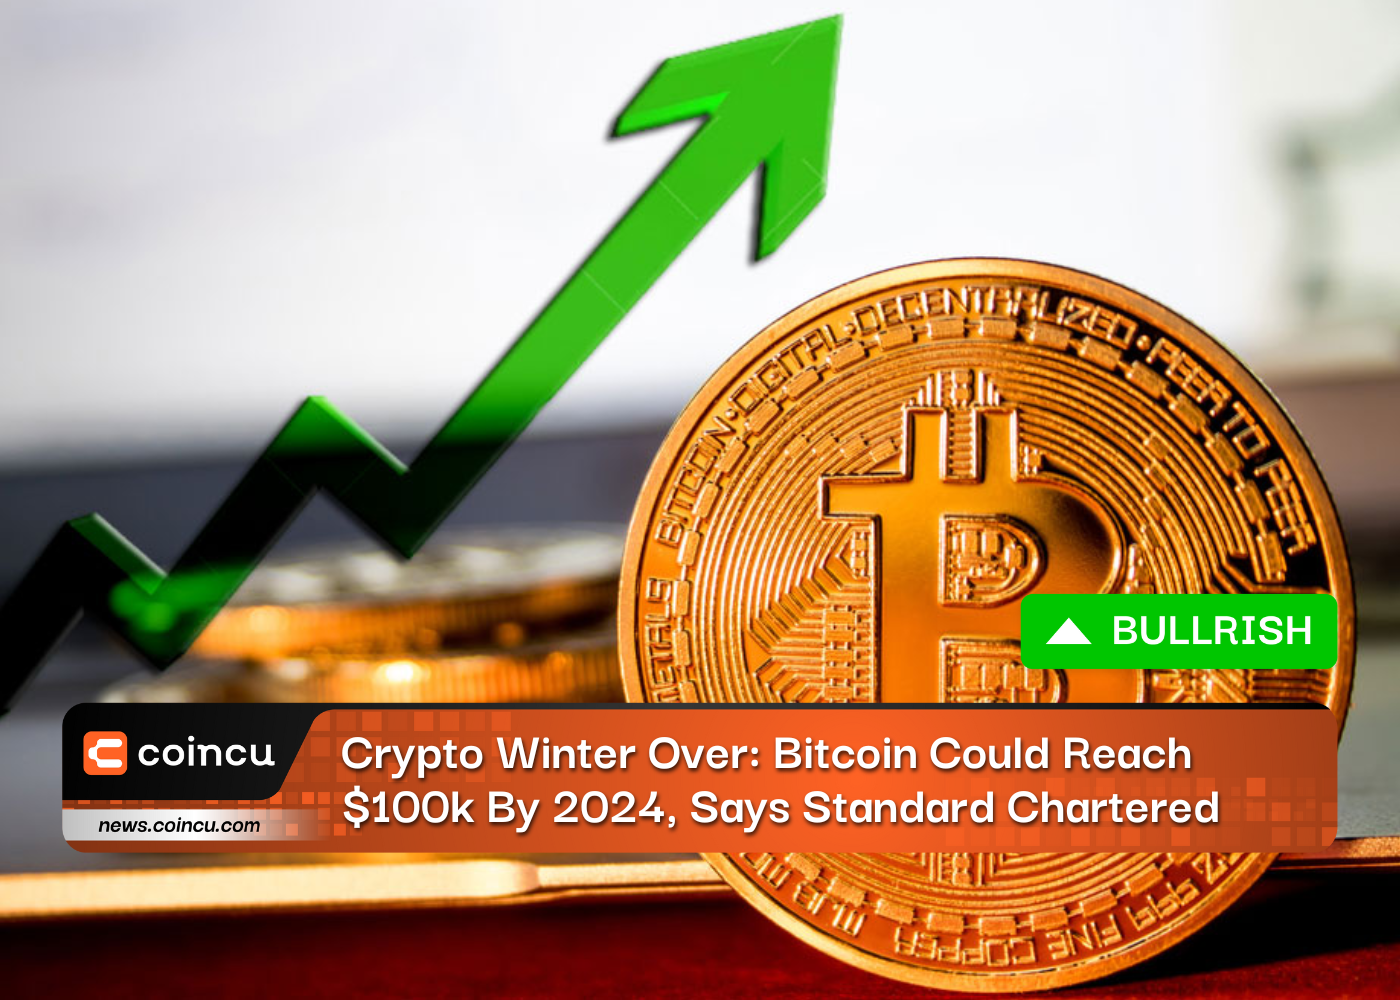 Crypto Winter Over: Bitcoin Could Reach $100k By 2024, Says Standard Chartered